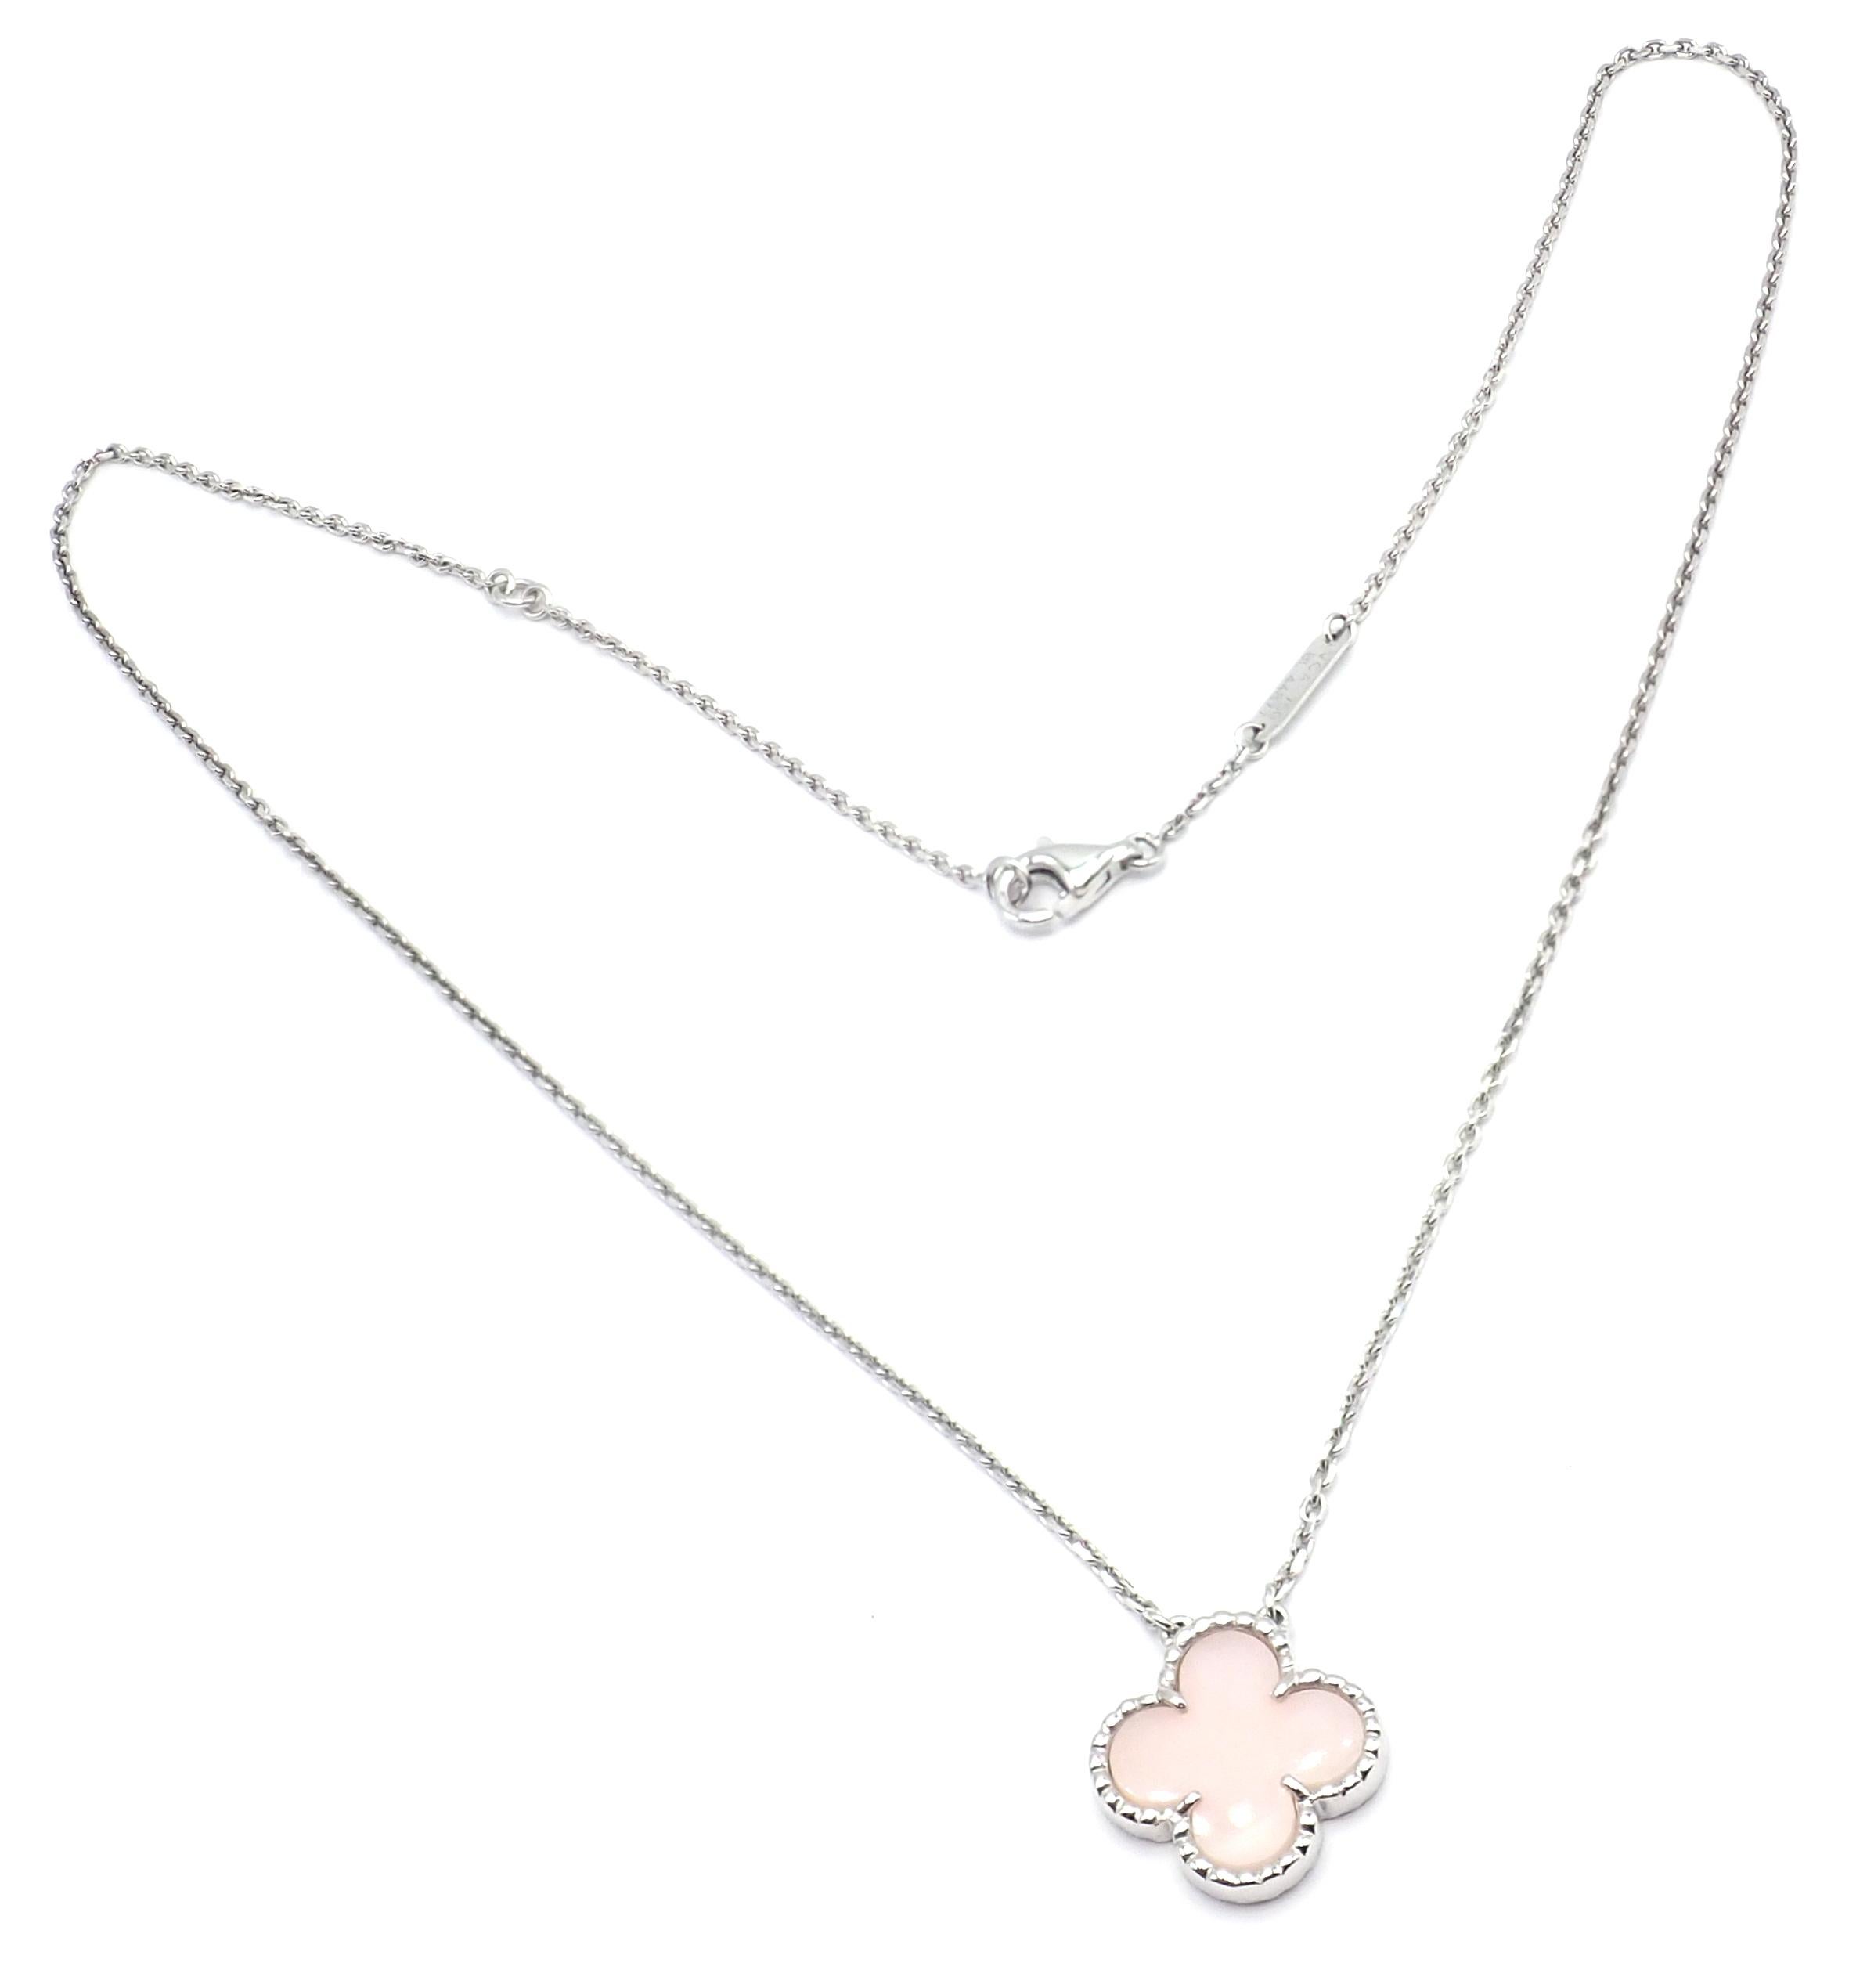 Van Cleef & Arpels Vintage Pink Opal White Gold Pendant Necklace In Excellent Condition For Sale In Holland, PA